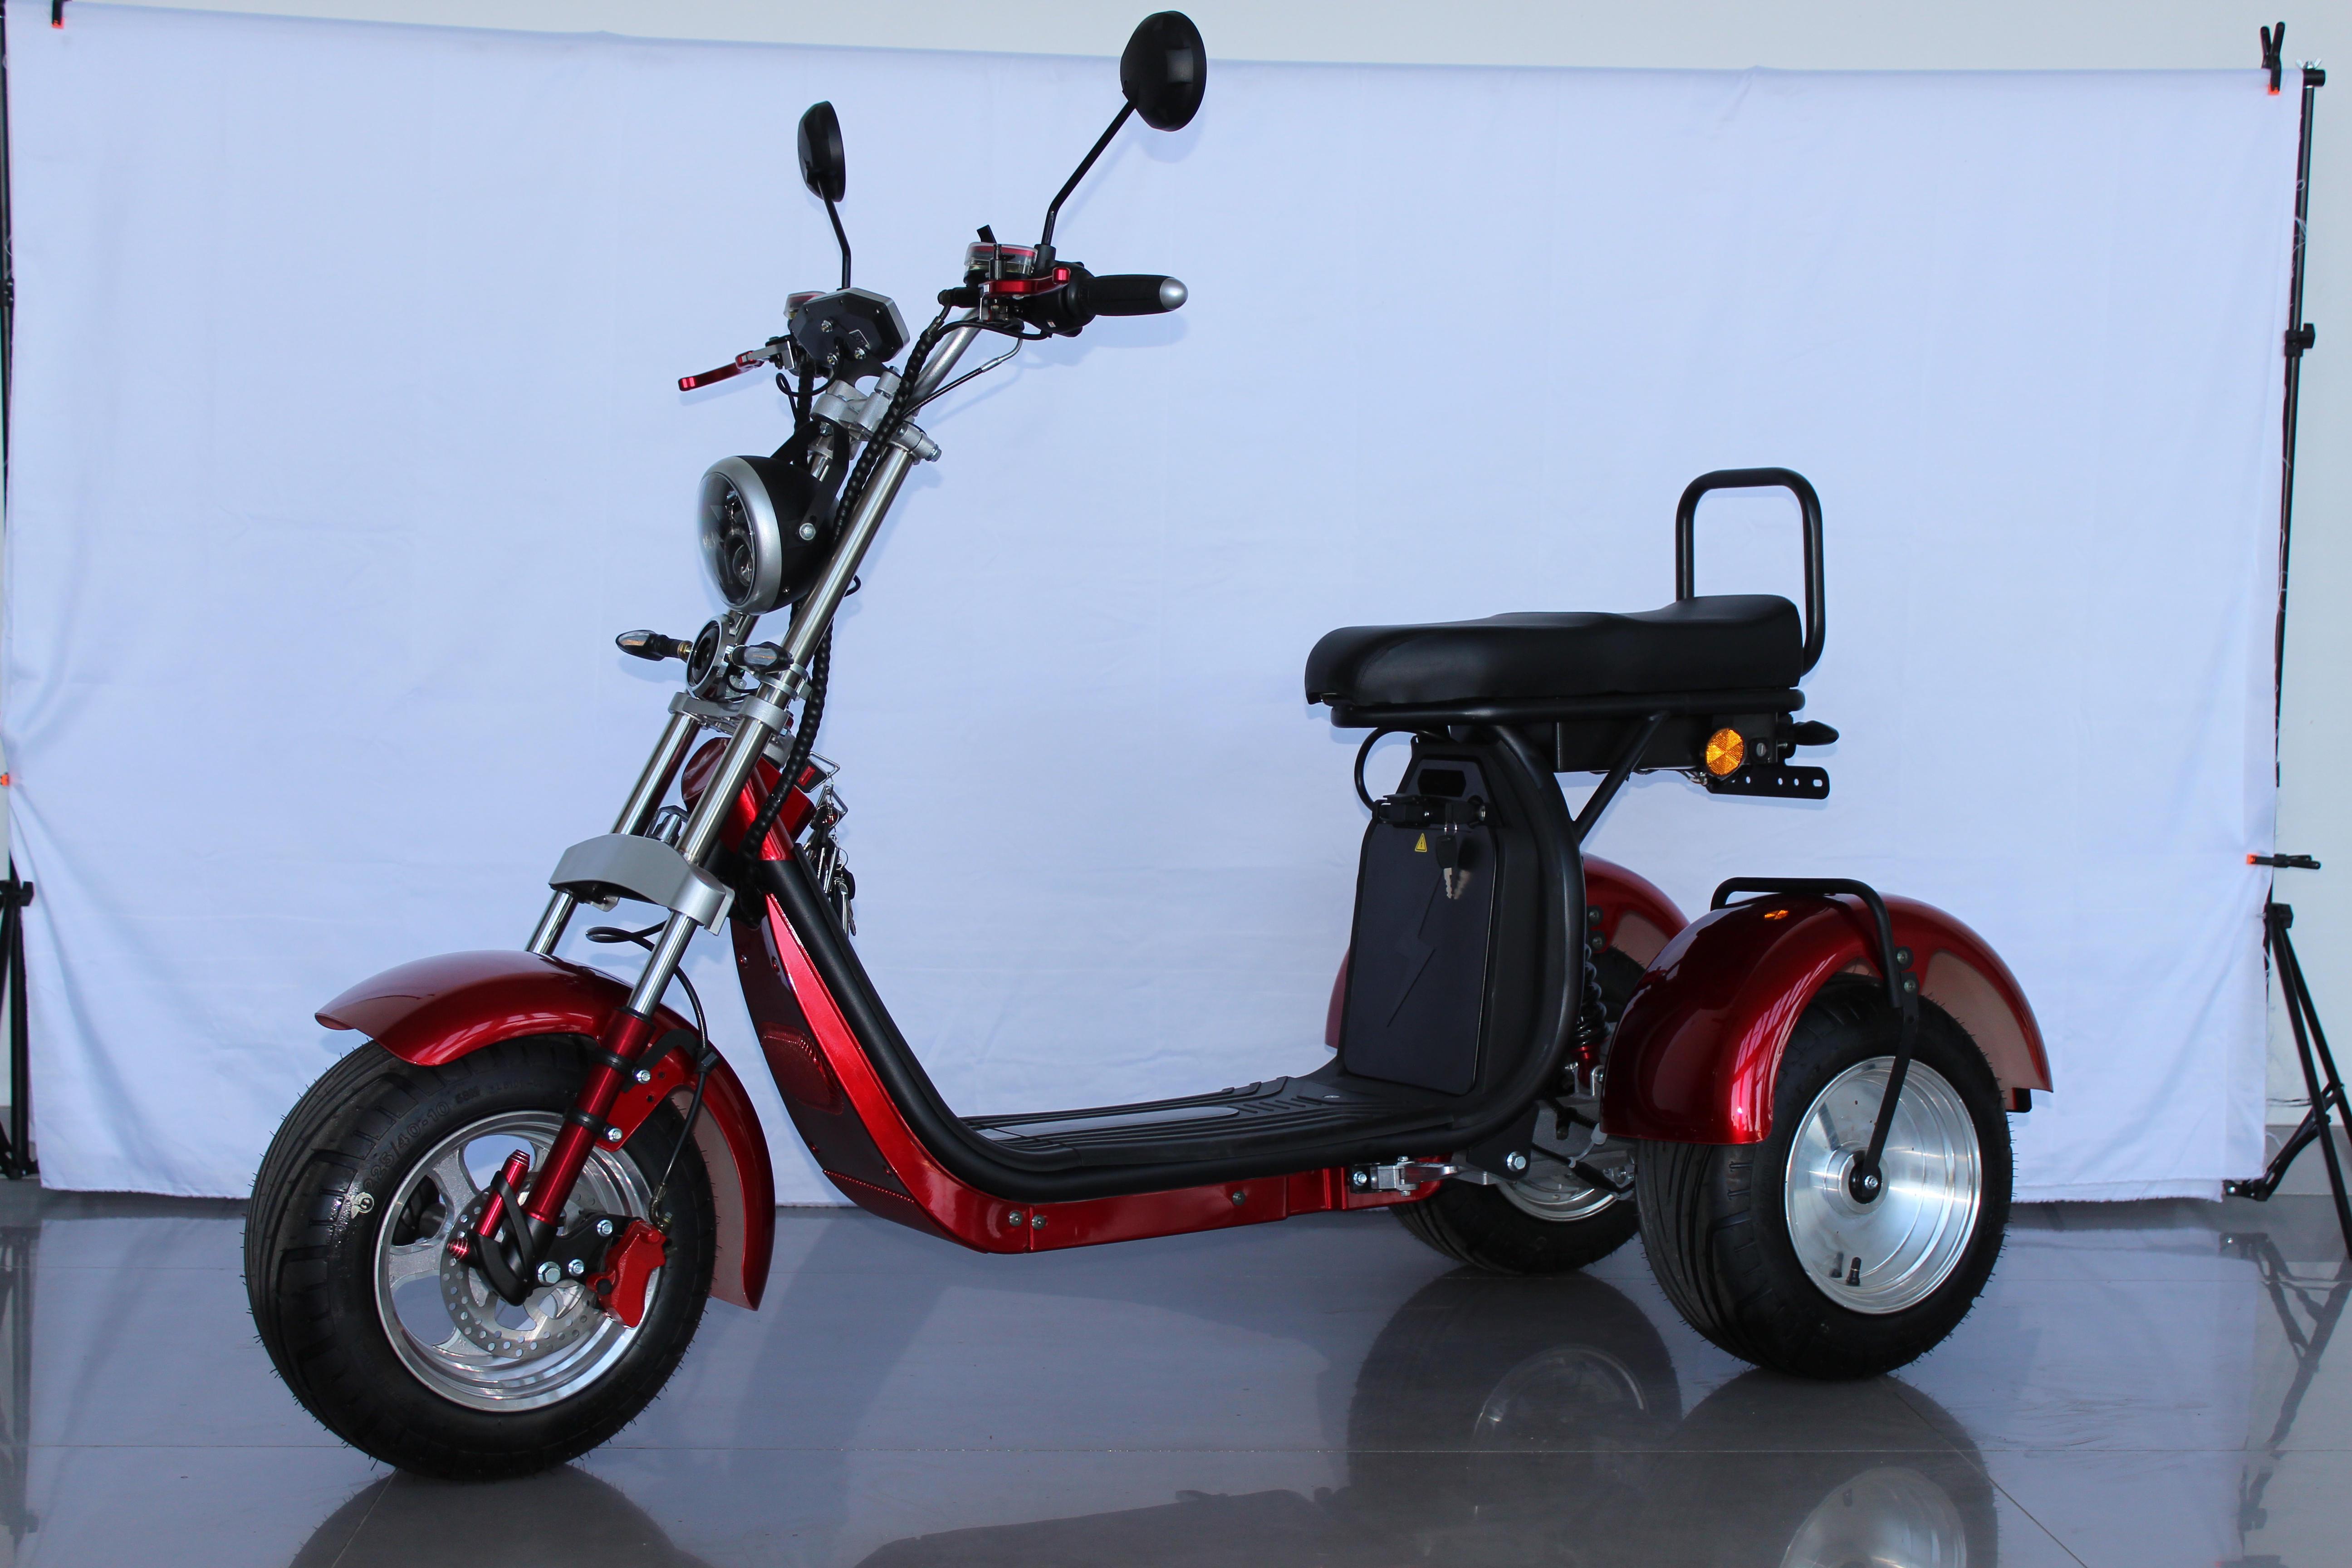  Eu Warehouse Citycoco CP-7 4000W 25ah 30ah 10 Inch Electric Scooter 3 Whee Electric Motorcycle